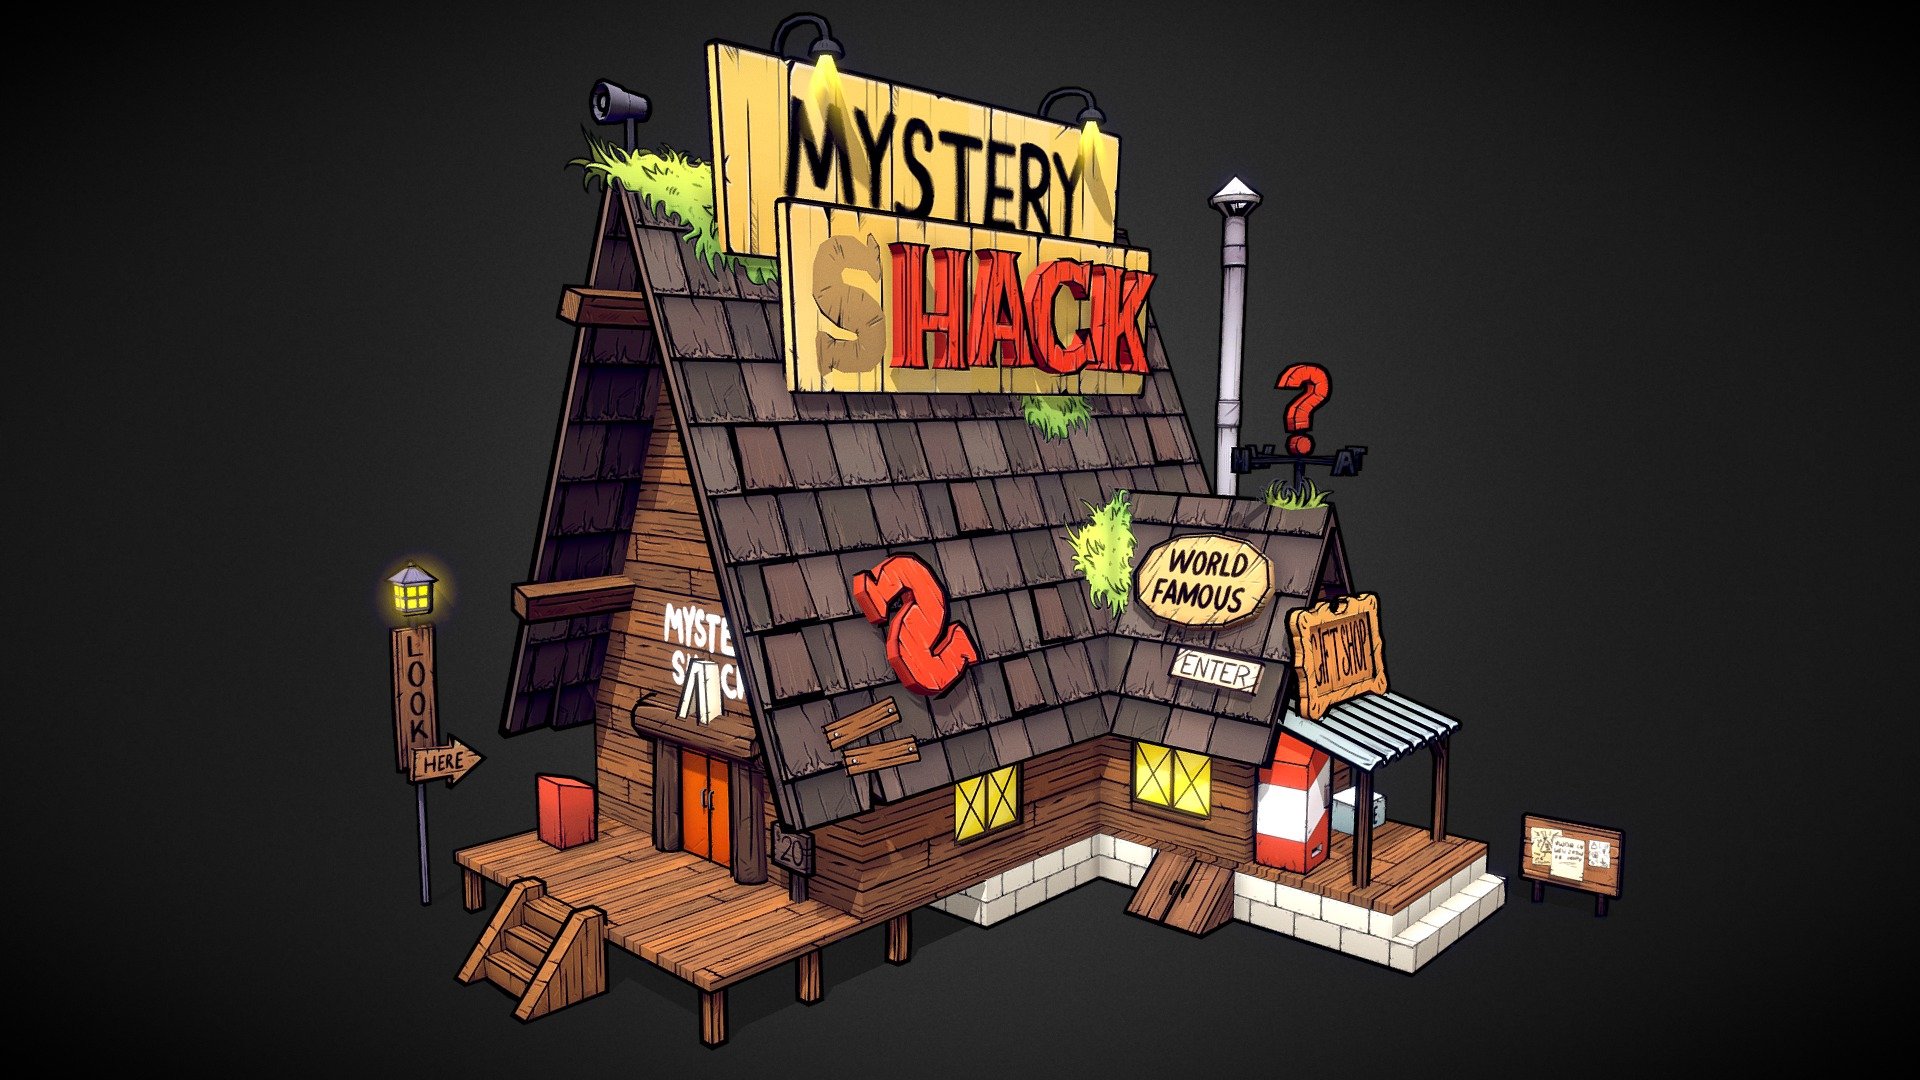 Hi! I wanted to try new 3D style, with an outliner shader&hellip; do you like it?

Handpainted textures
7501 Tris (13346 with the outline effect
*Mystery Shack from Gravity Falls

-&gt; On deviantart: https://www.deviantart.com/elo-doudoune/art/The-Mystery-Shack-788587706 - The Mystery Shack - 3D model by Emeryl (@elo-doudoune) 3d model